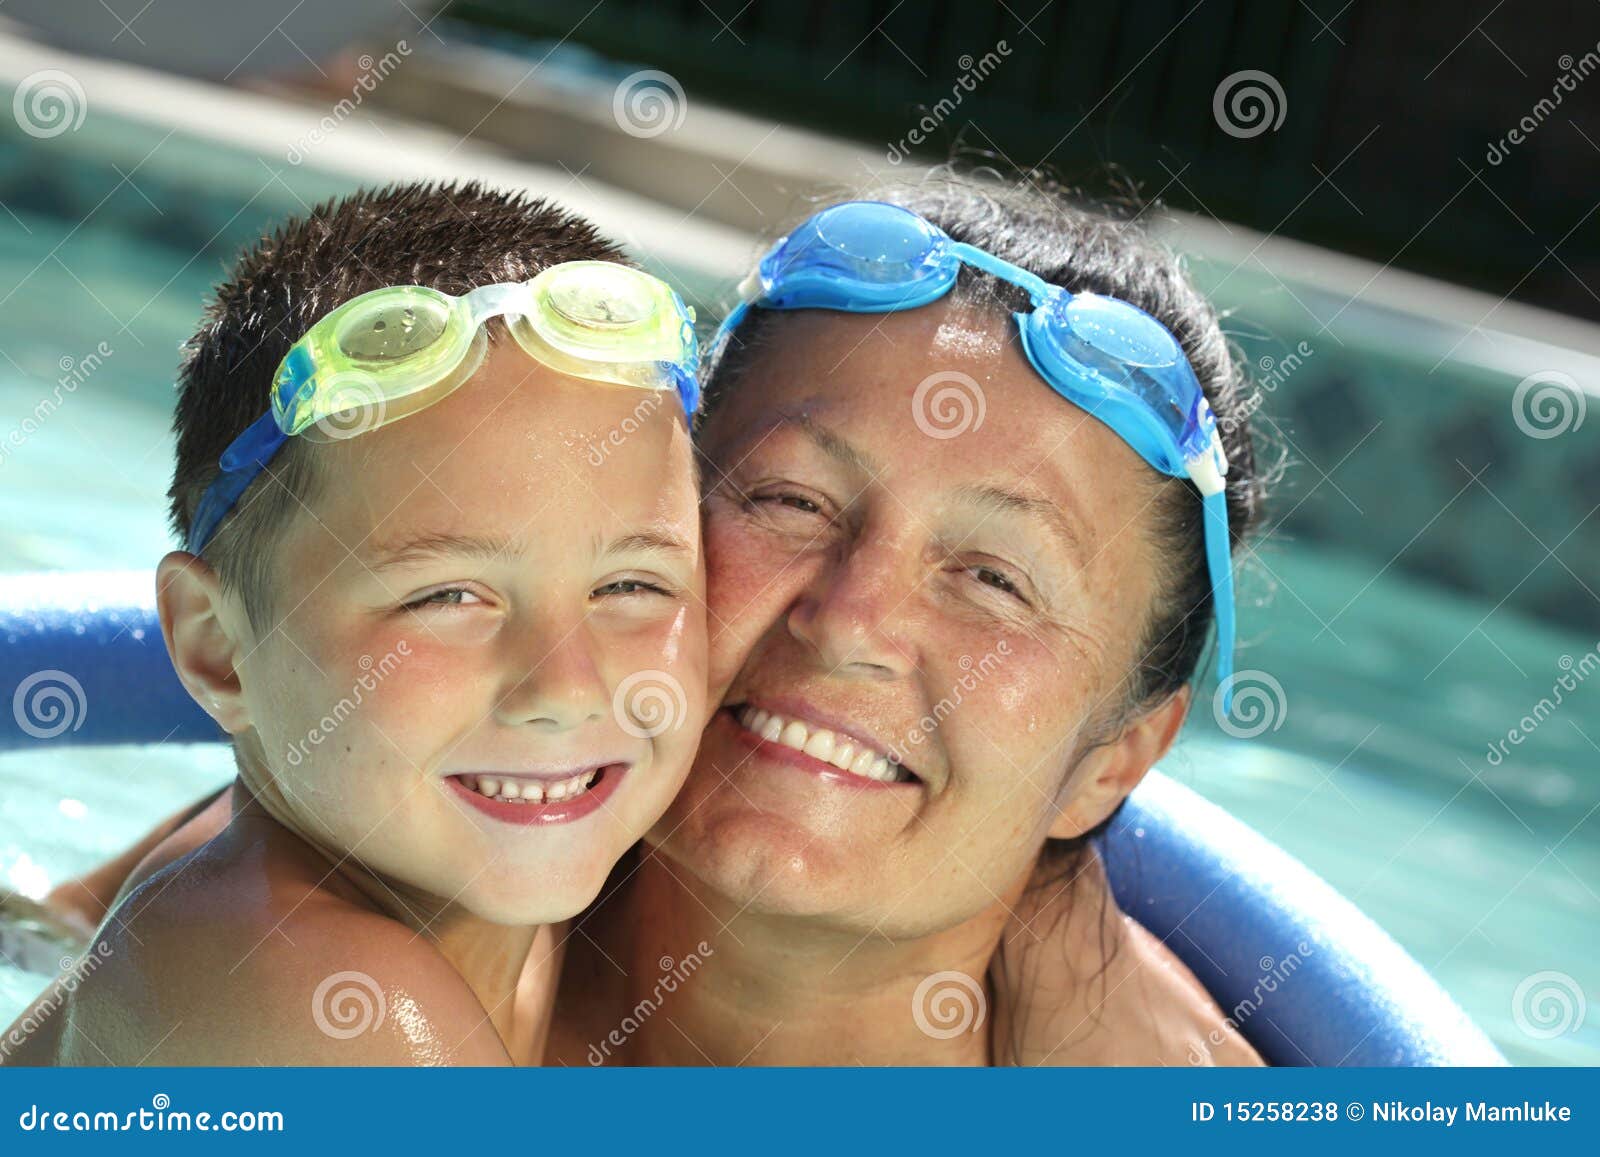 Summertime bliss stock photo. Image of activity, goggles - 15258238